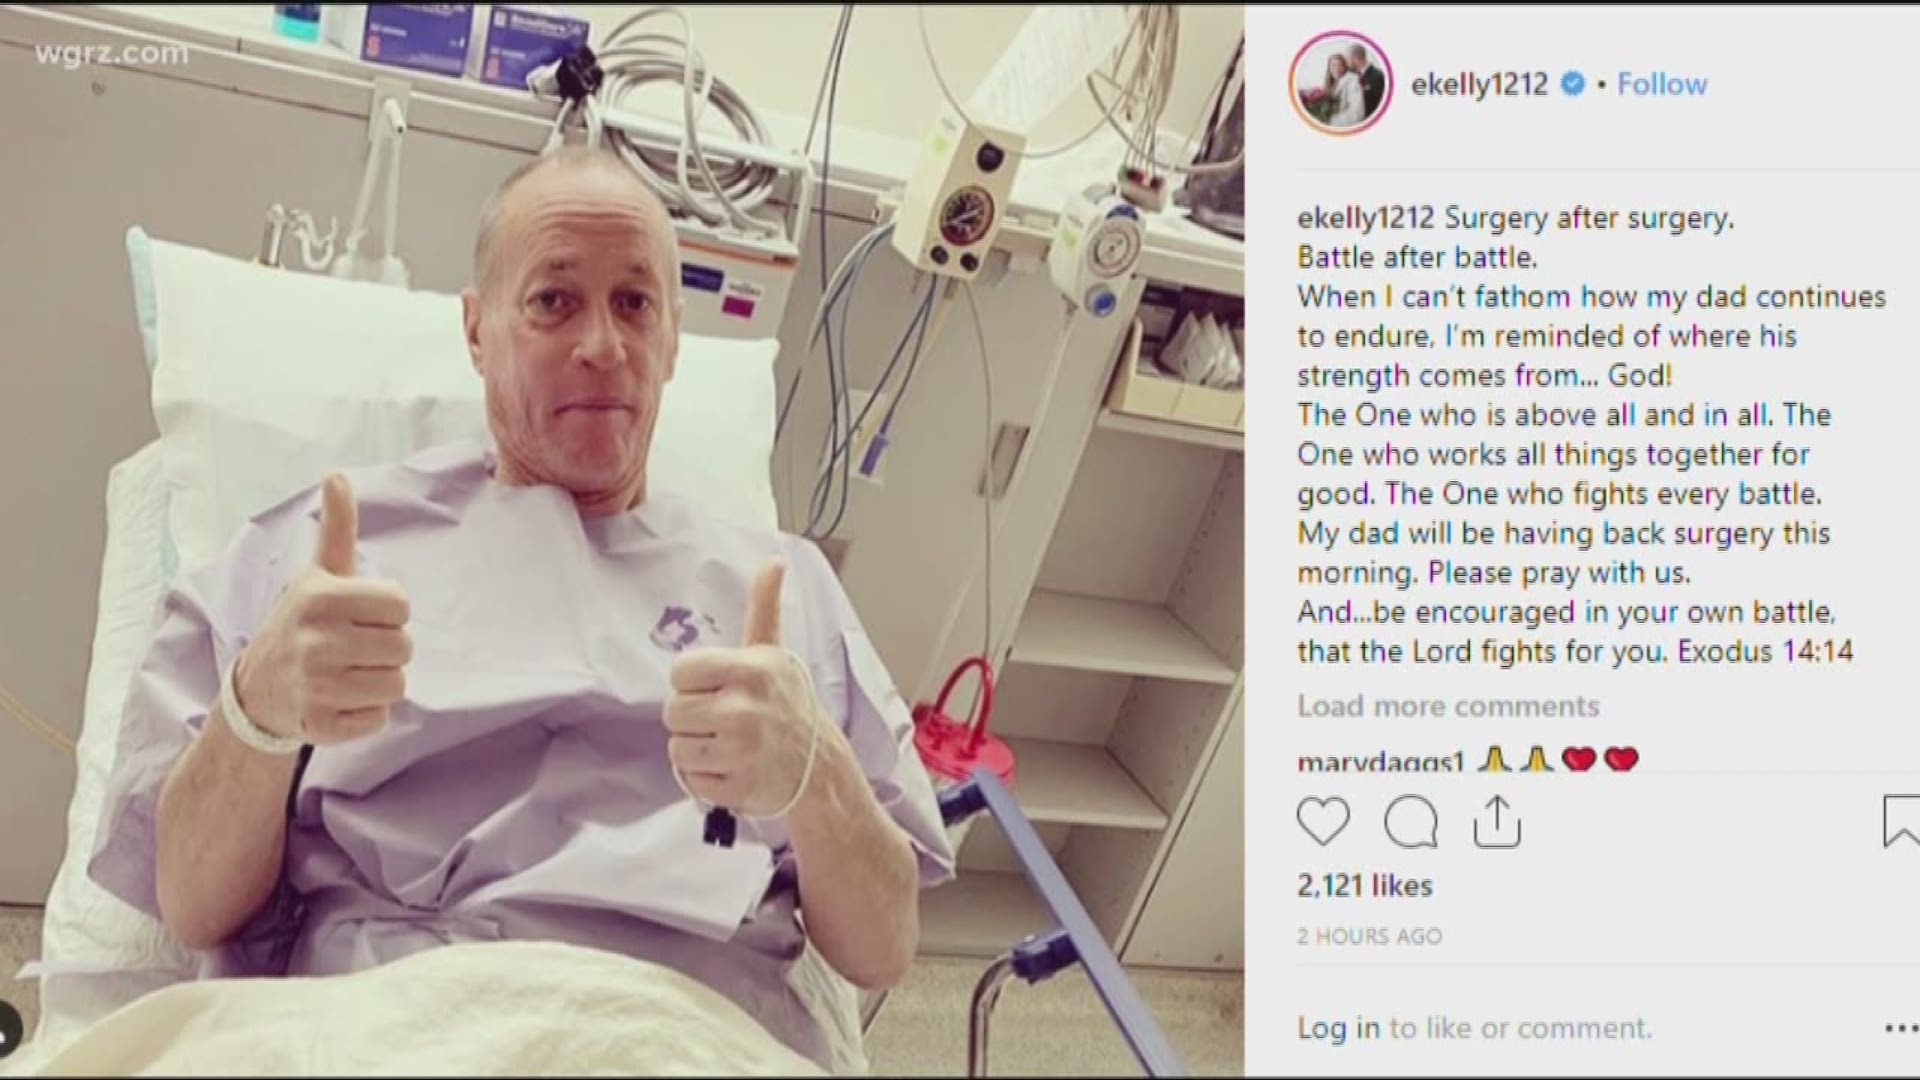 Jim Kelly undergoes back surgery to remove cyst